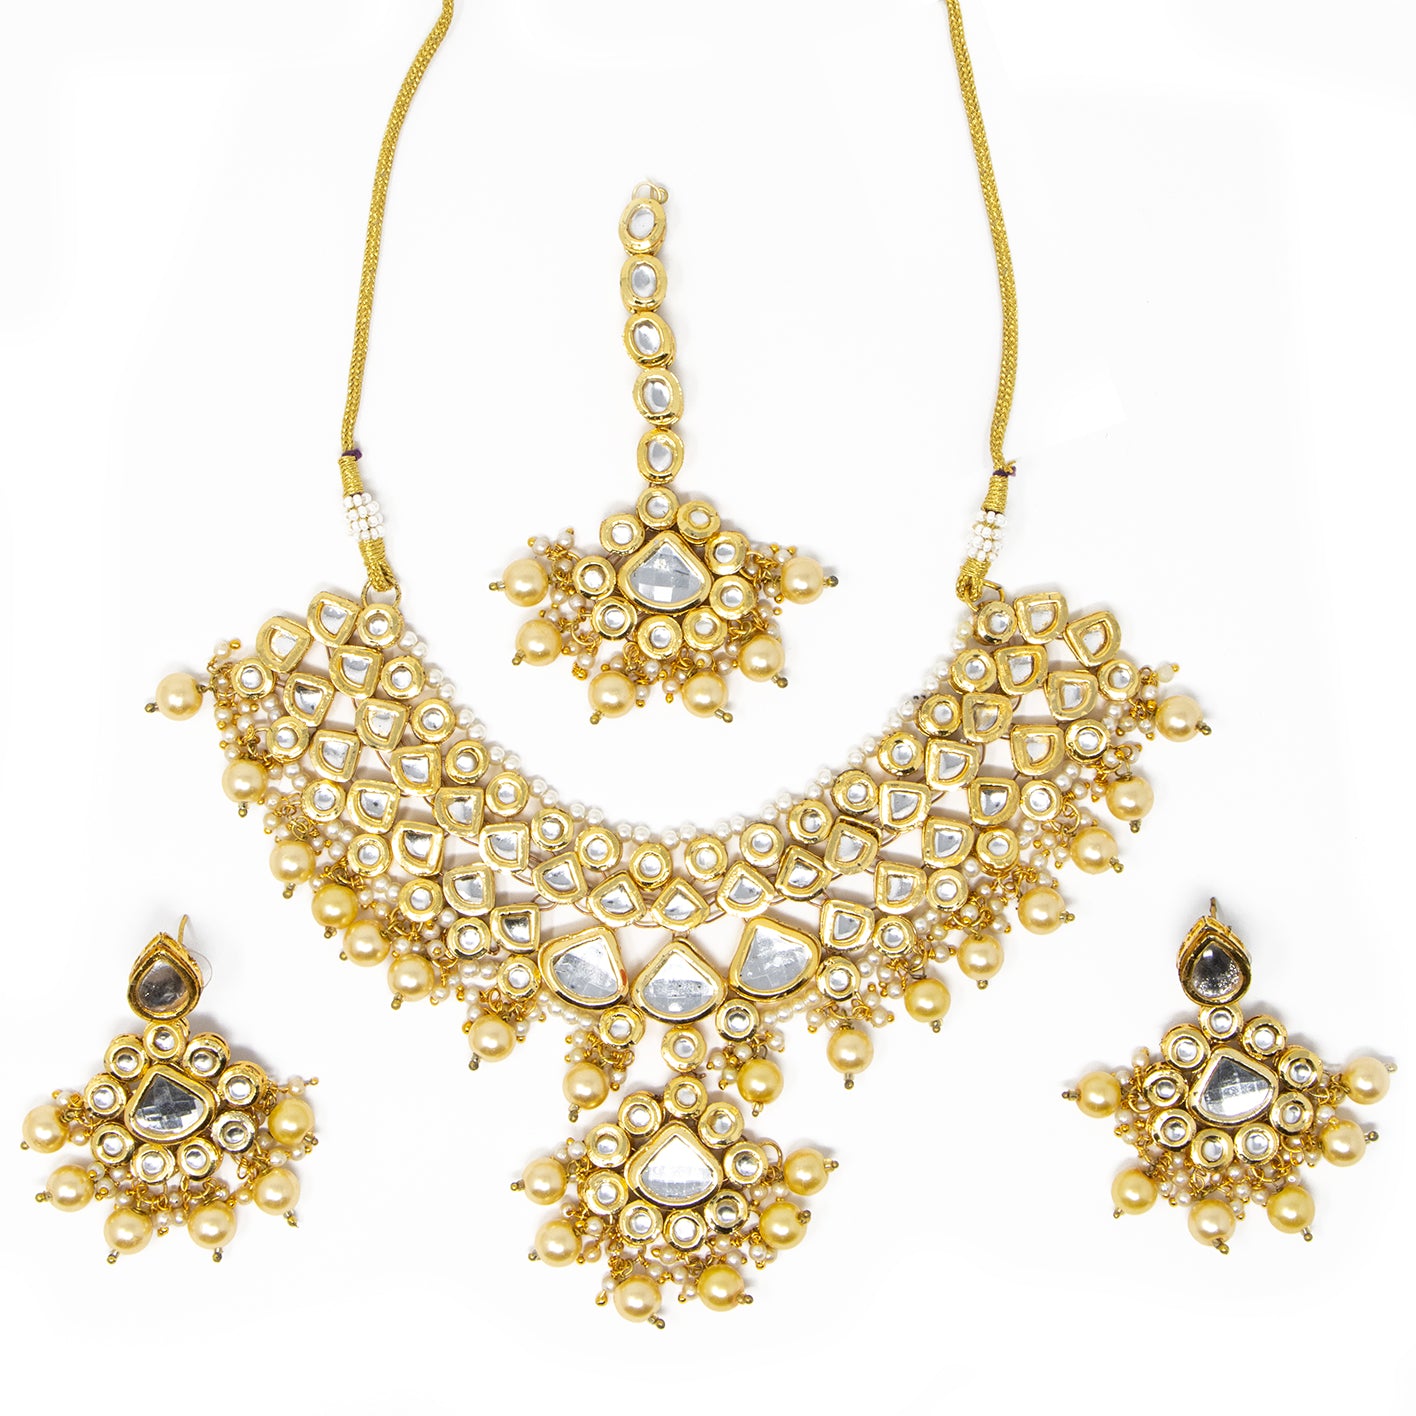 3 piece set Gold Necklace, earrings and bindi included